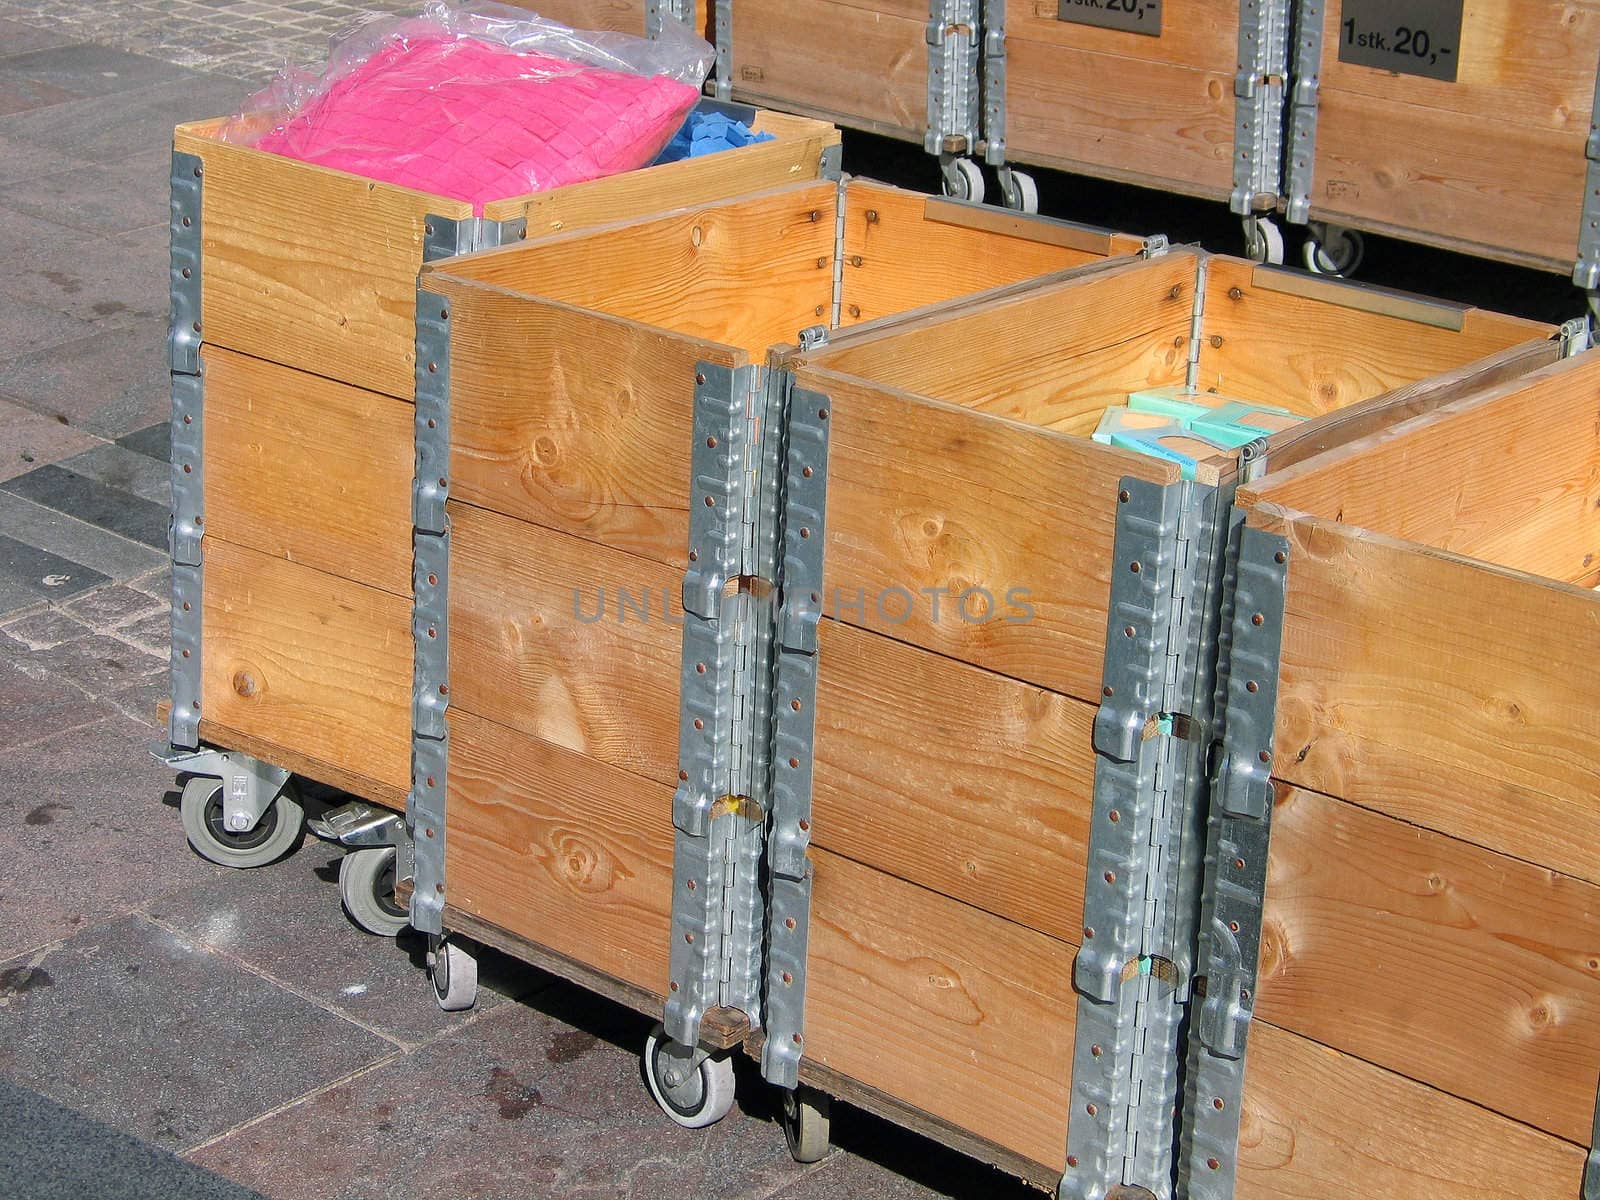 Cargo delivery storage wooden crates in a store